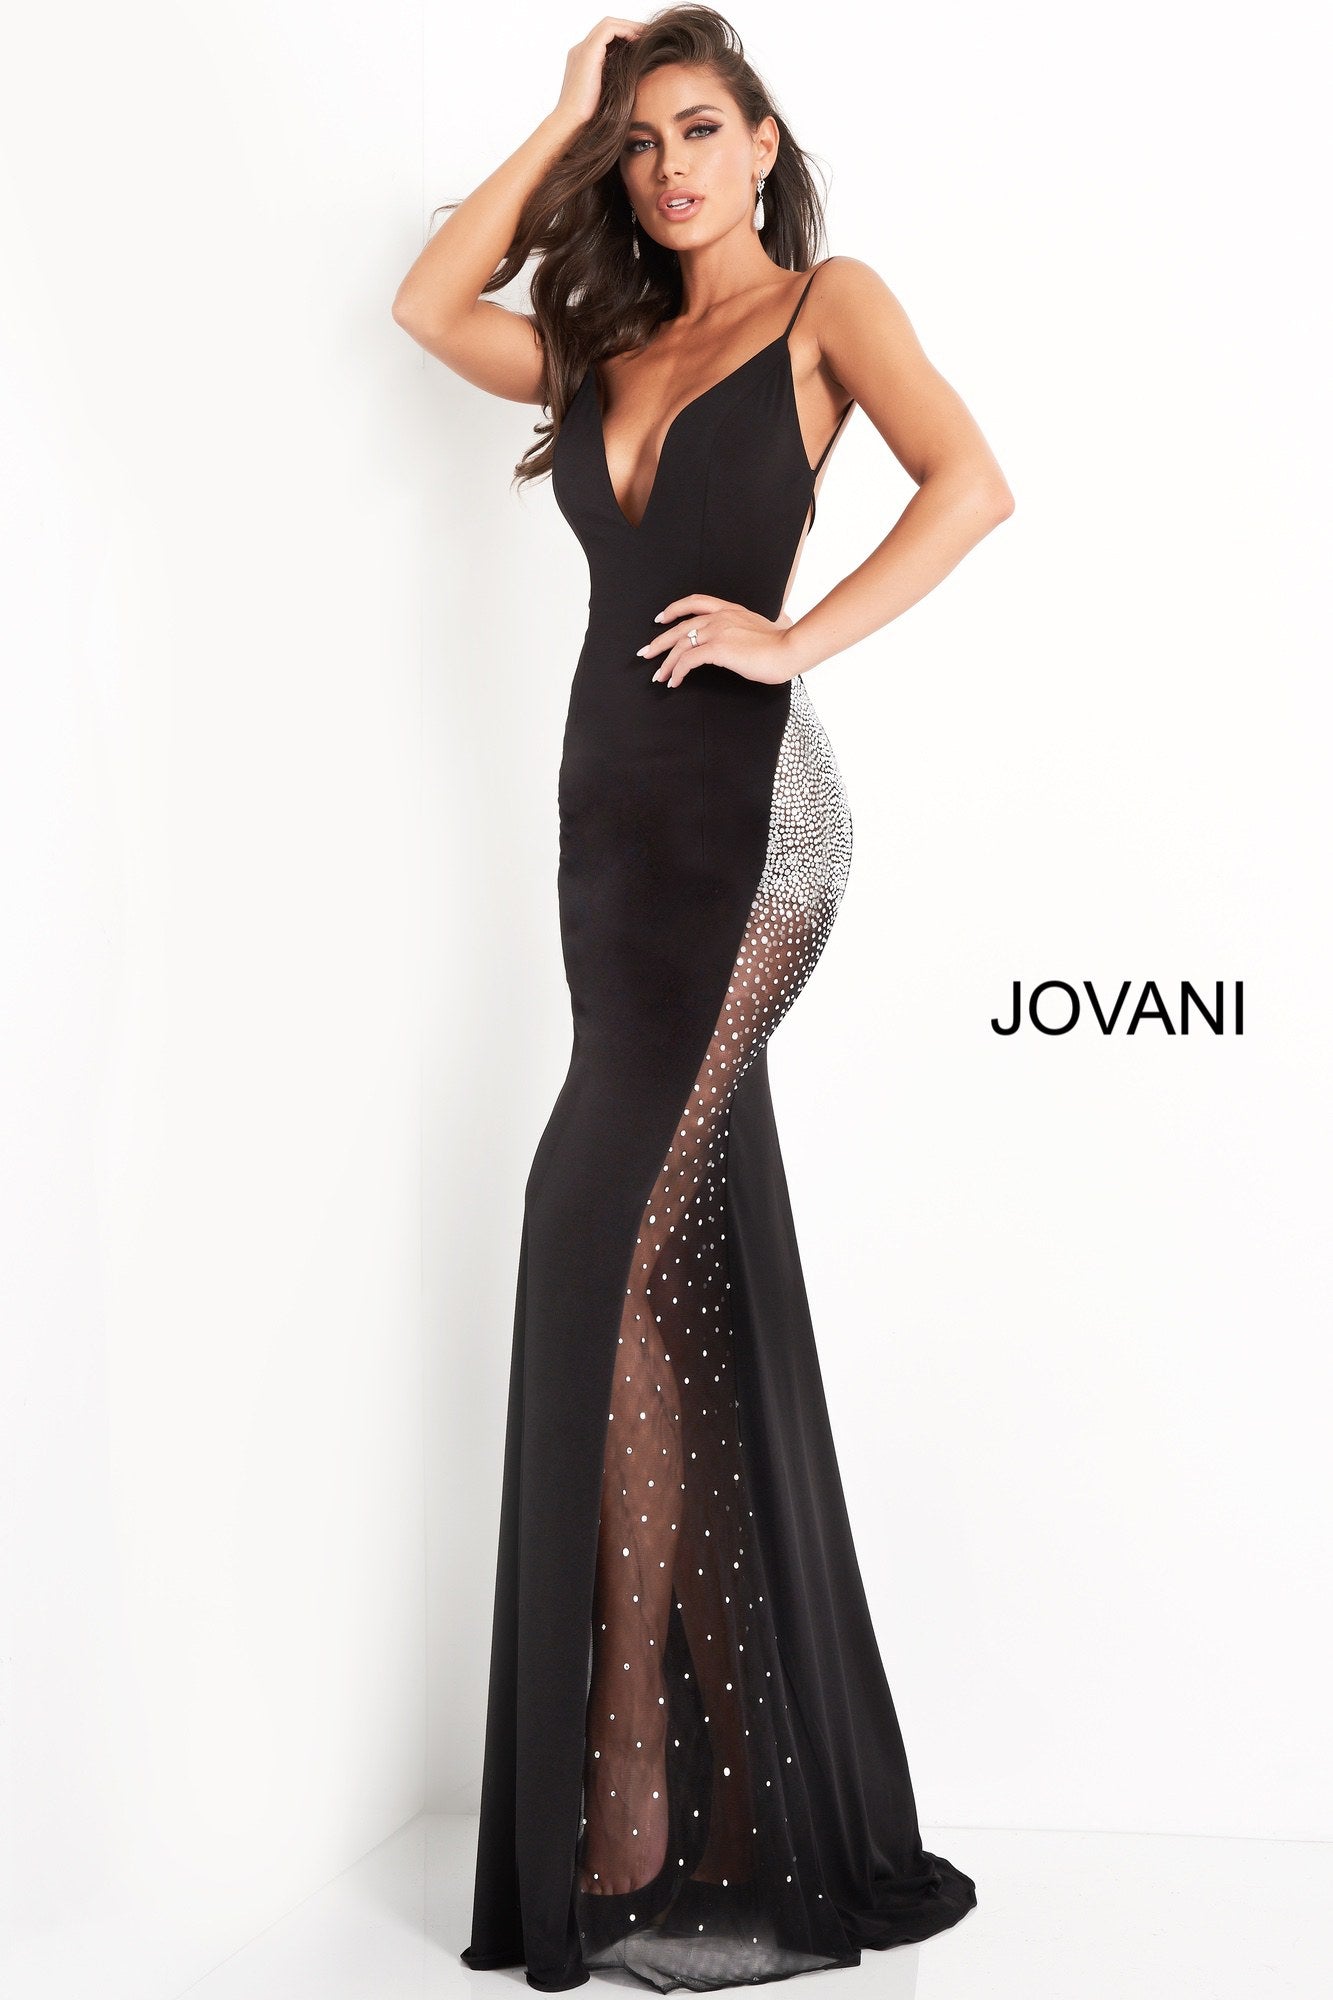 Jovani 06566 is a long fitted formal evening gown. Featuring a deep V Neckline with spaghetti straps and an open back. Sheer side panel on skirt has crystal rhinestones along the hip area dispersing as it flows down the skirt. Great Red Carpet Sexy Black Dress. Available Sizes: 00,0,2,4,6,8,10,12,14,16,18,20,22,24  Available Colors: Black, Light Blue, Red